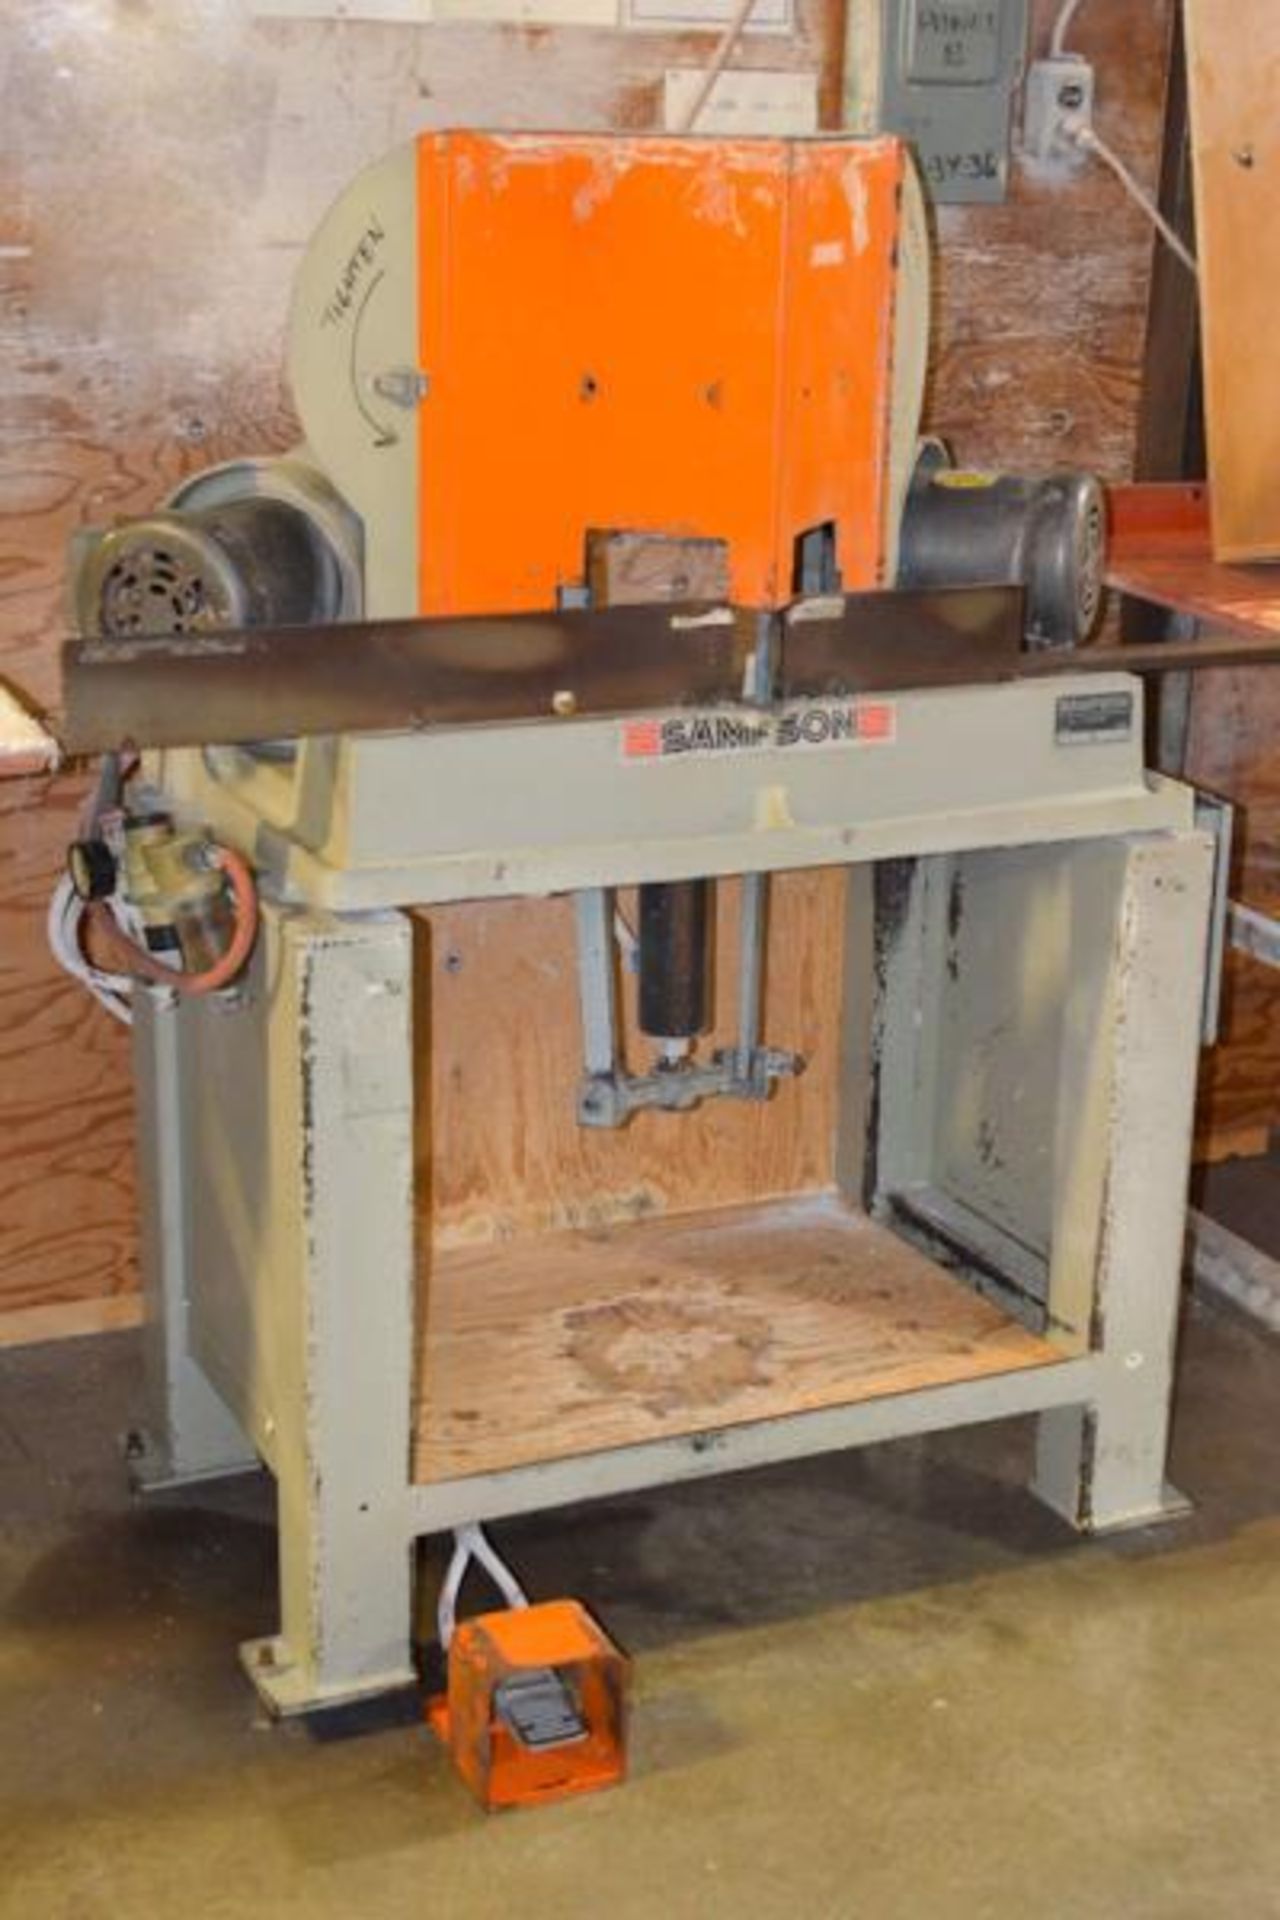 SAMPSON MN 14 14” DOUBLE MITER SAW, 5.75” X 31.5” X 35”H TABLE SIZE, CUTTING CAP. 7”H X 1”W AT MAX - Image 2 of 6